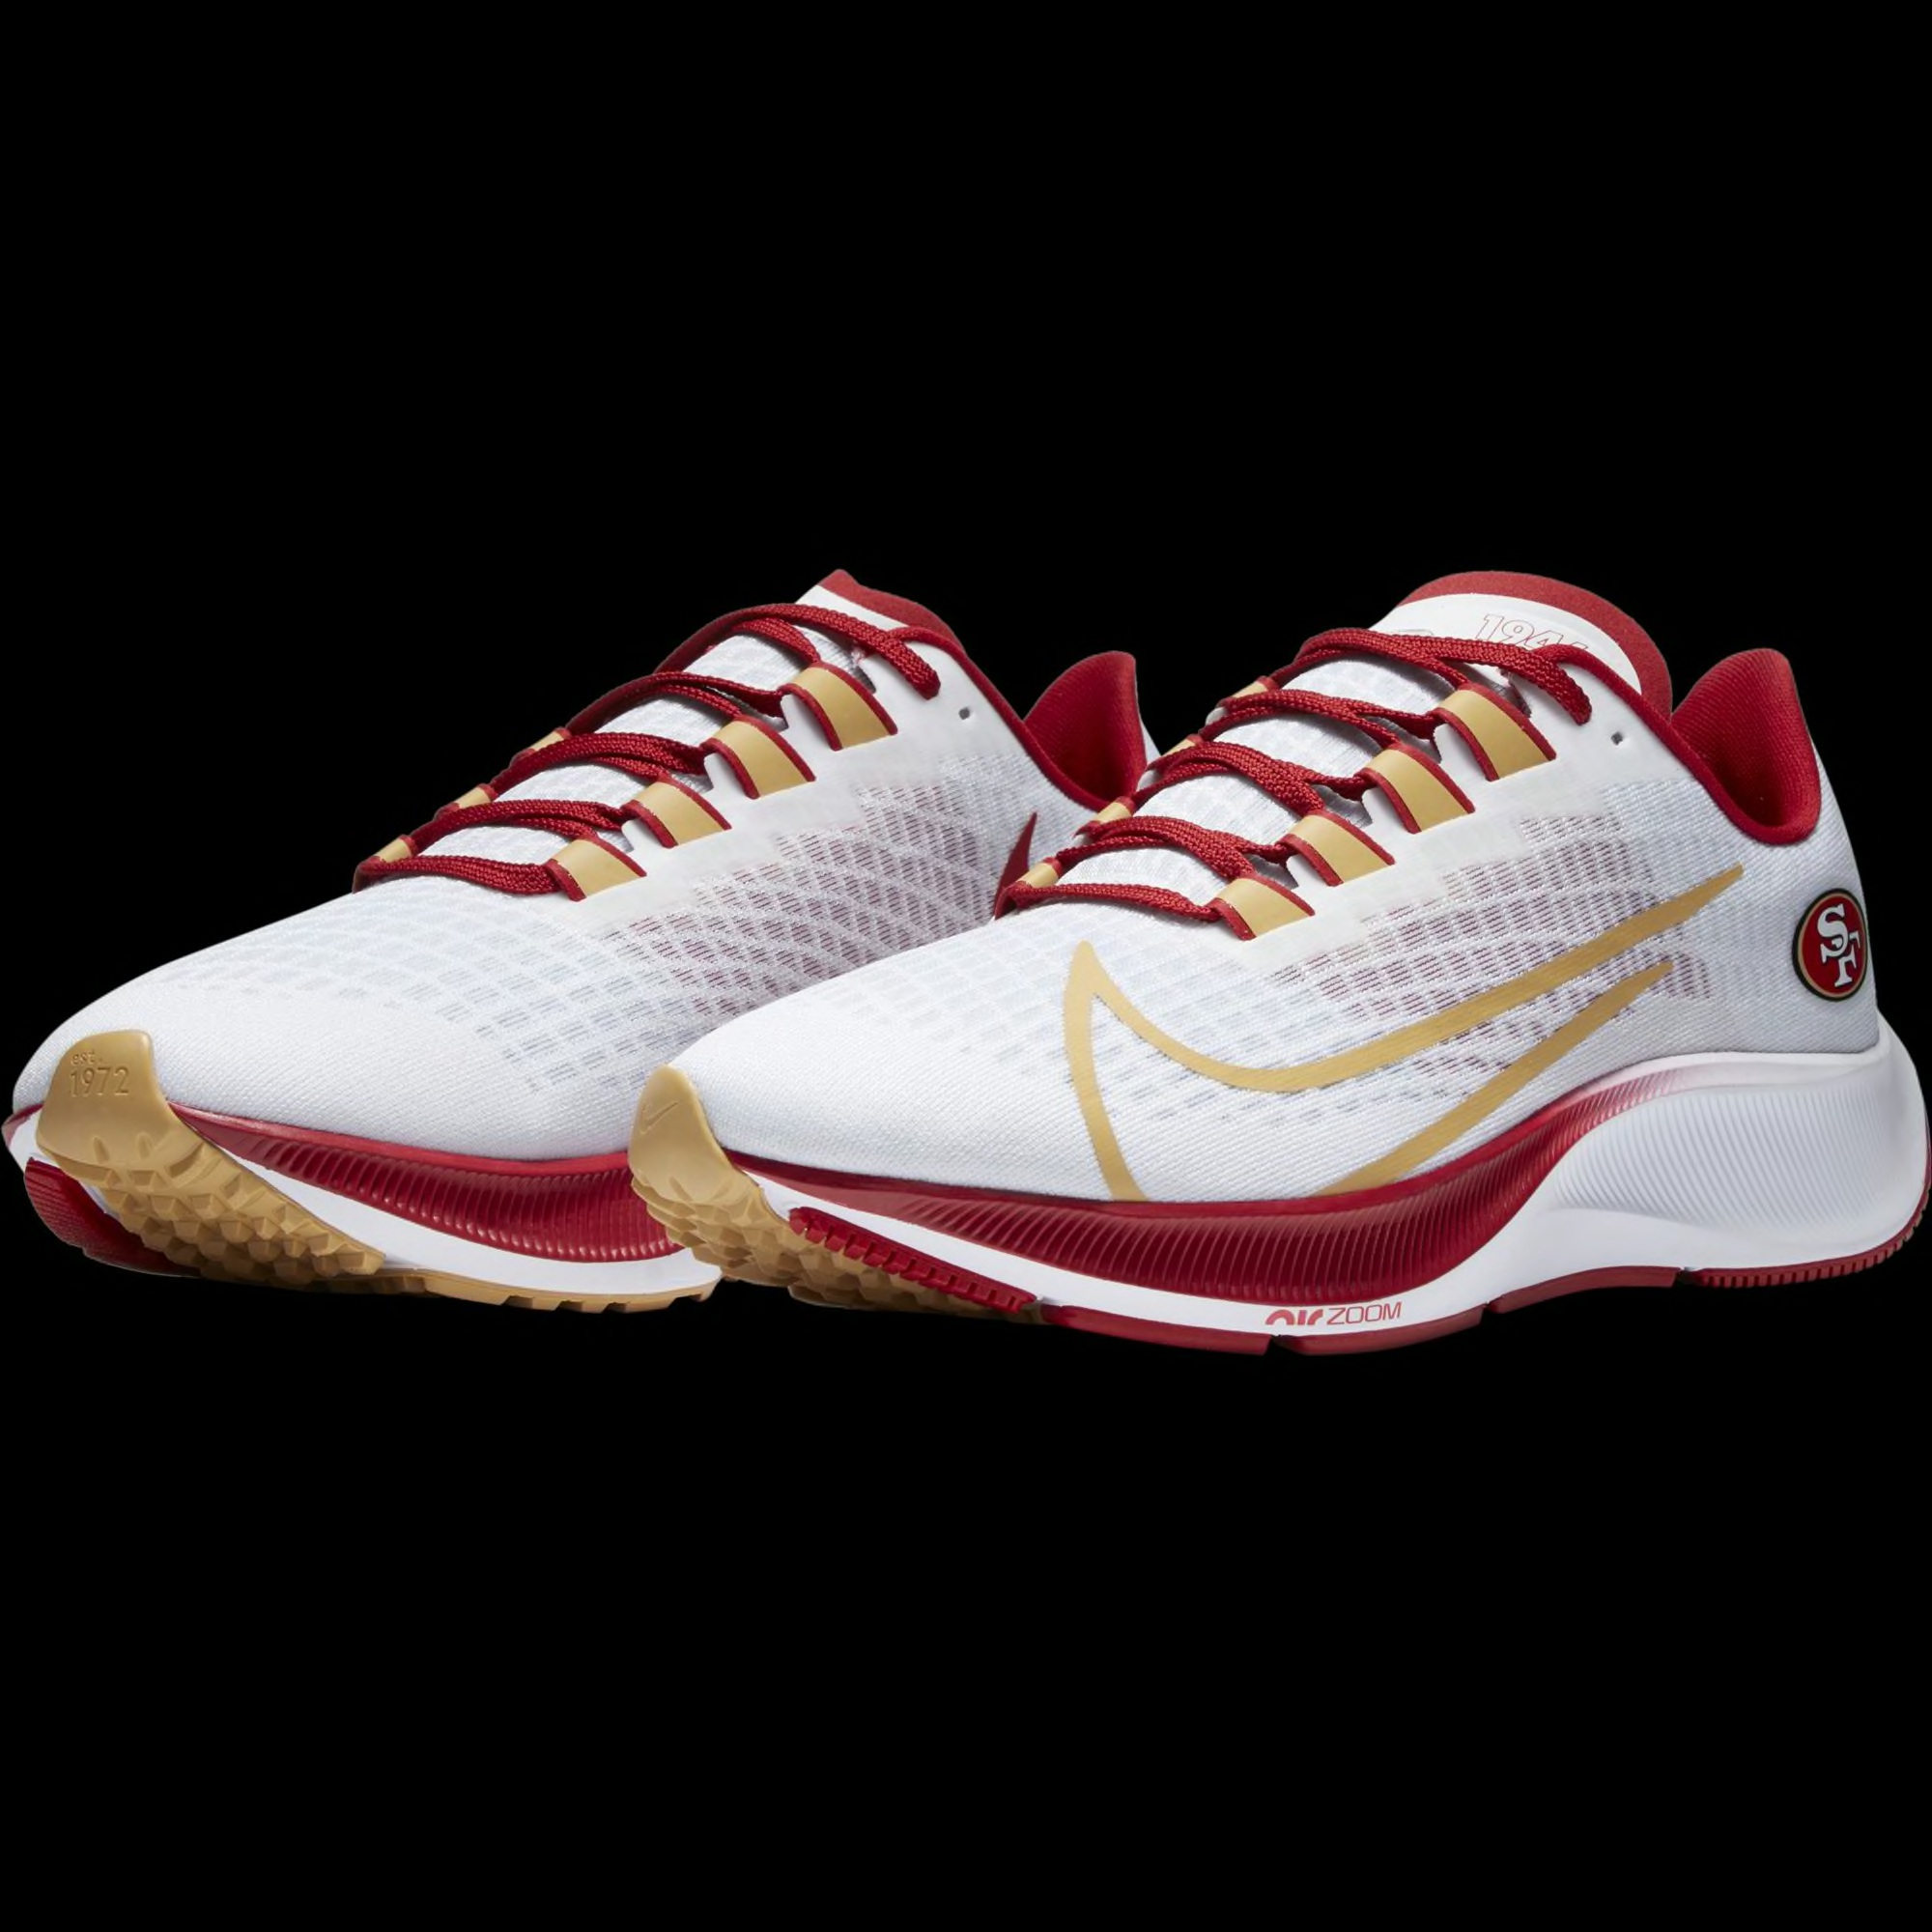 49ers tennis shoes